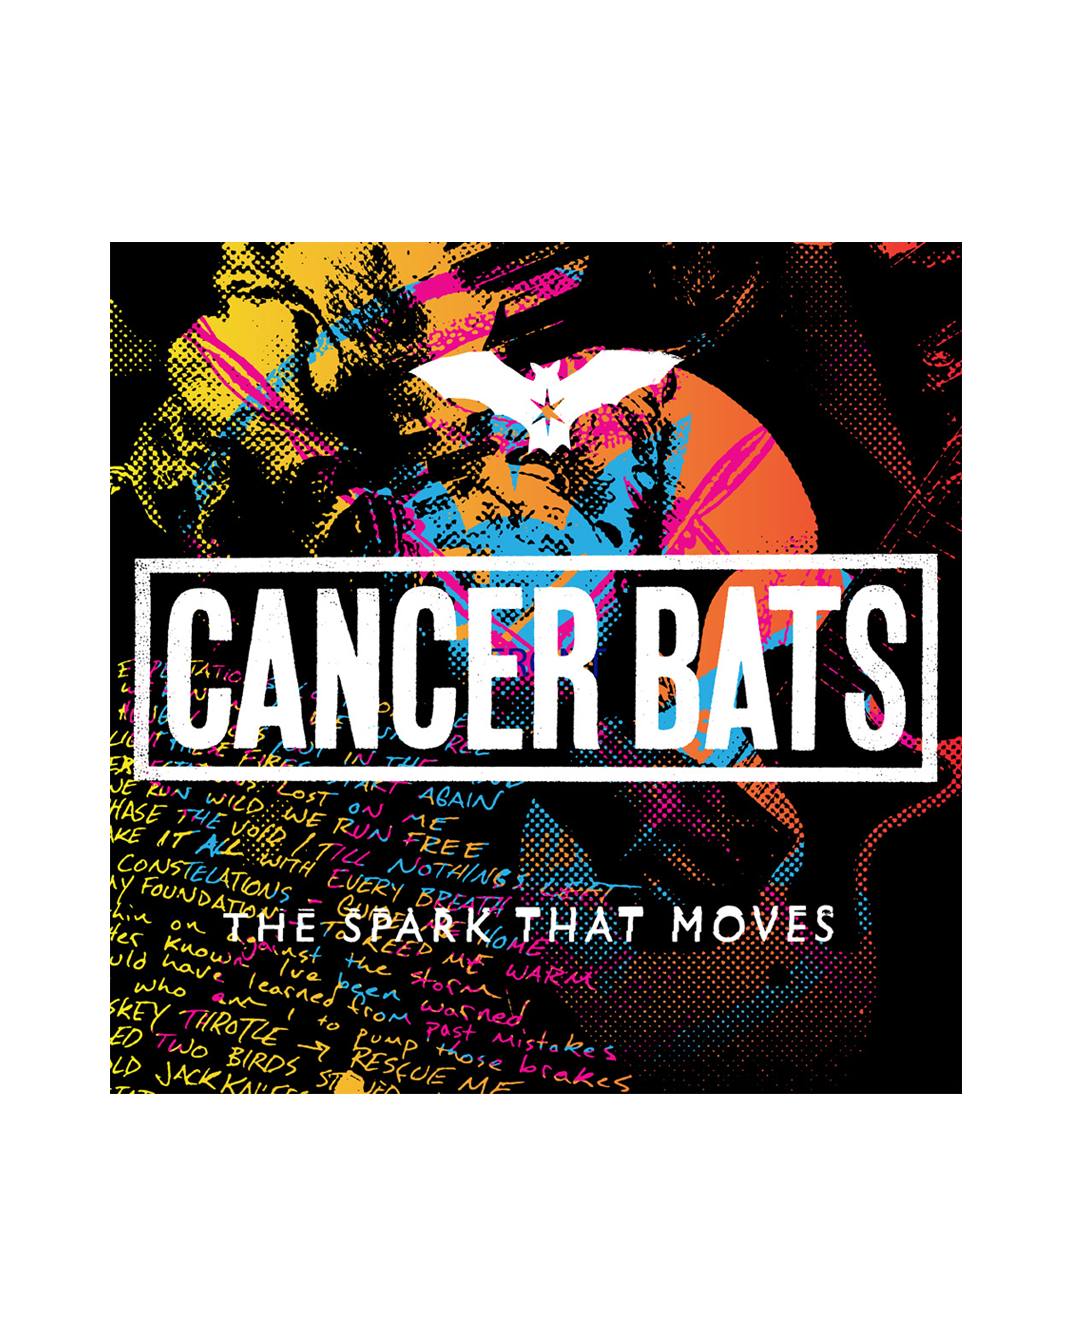 The Spark That Moves LP